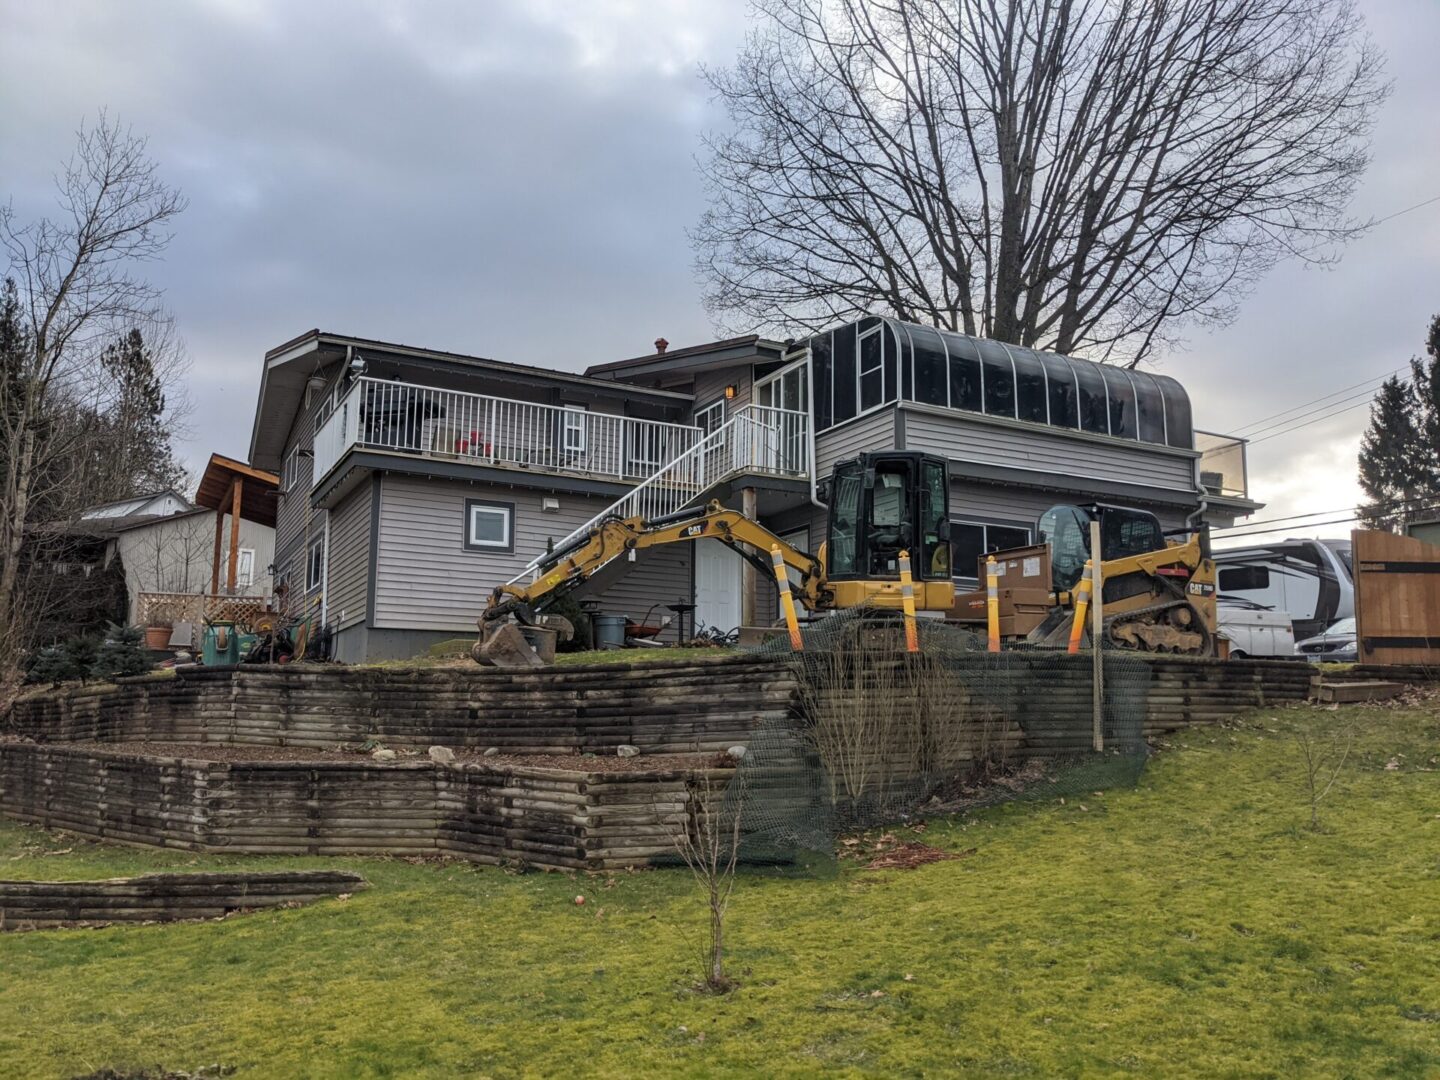 Backyard of a house with an excavator parked on grass, featuring tiered garden beds and a large tree. the house has a balcony and an enclosed porch.